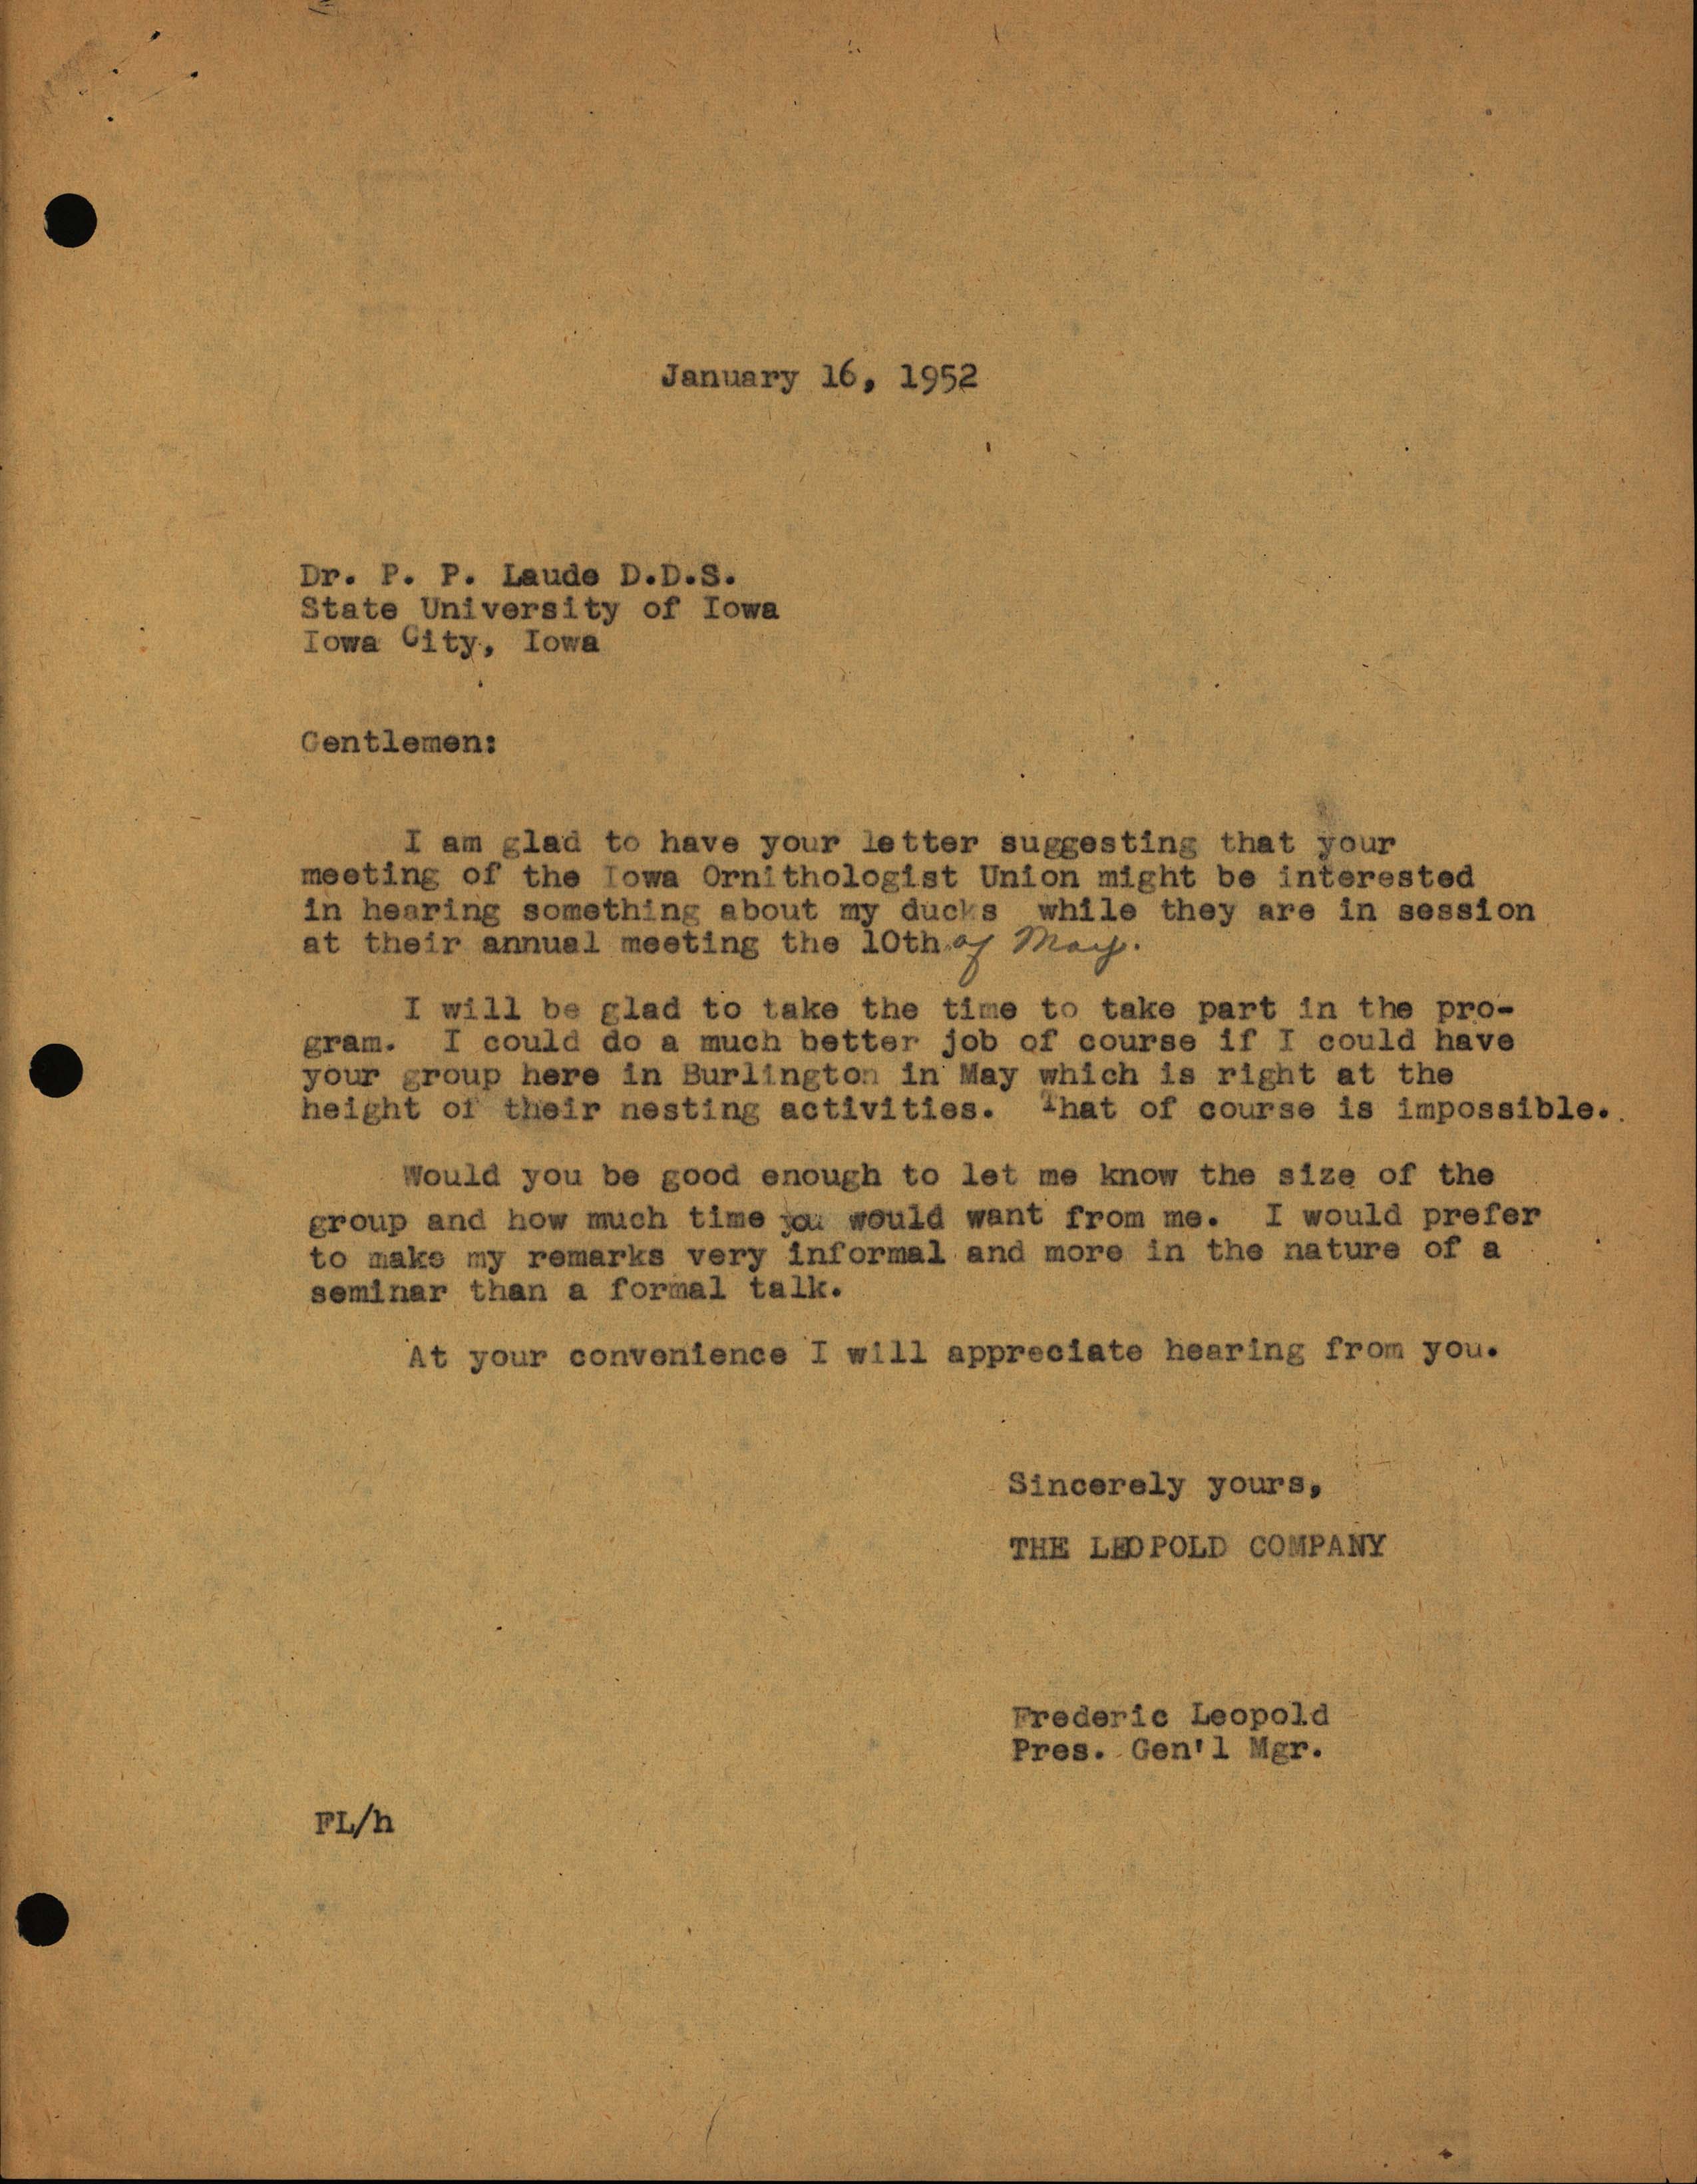 Frederic Leopold letter to Peter P. Laude regarding the Iowa Ornithologists' Union annual meeting, January 16, 1952